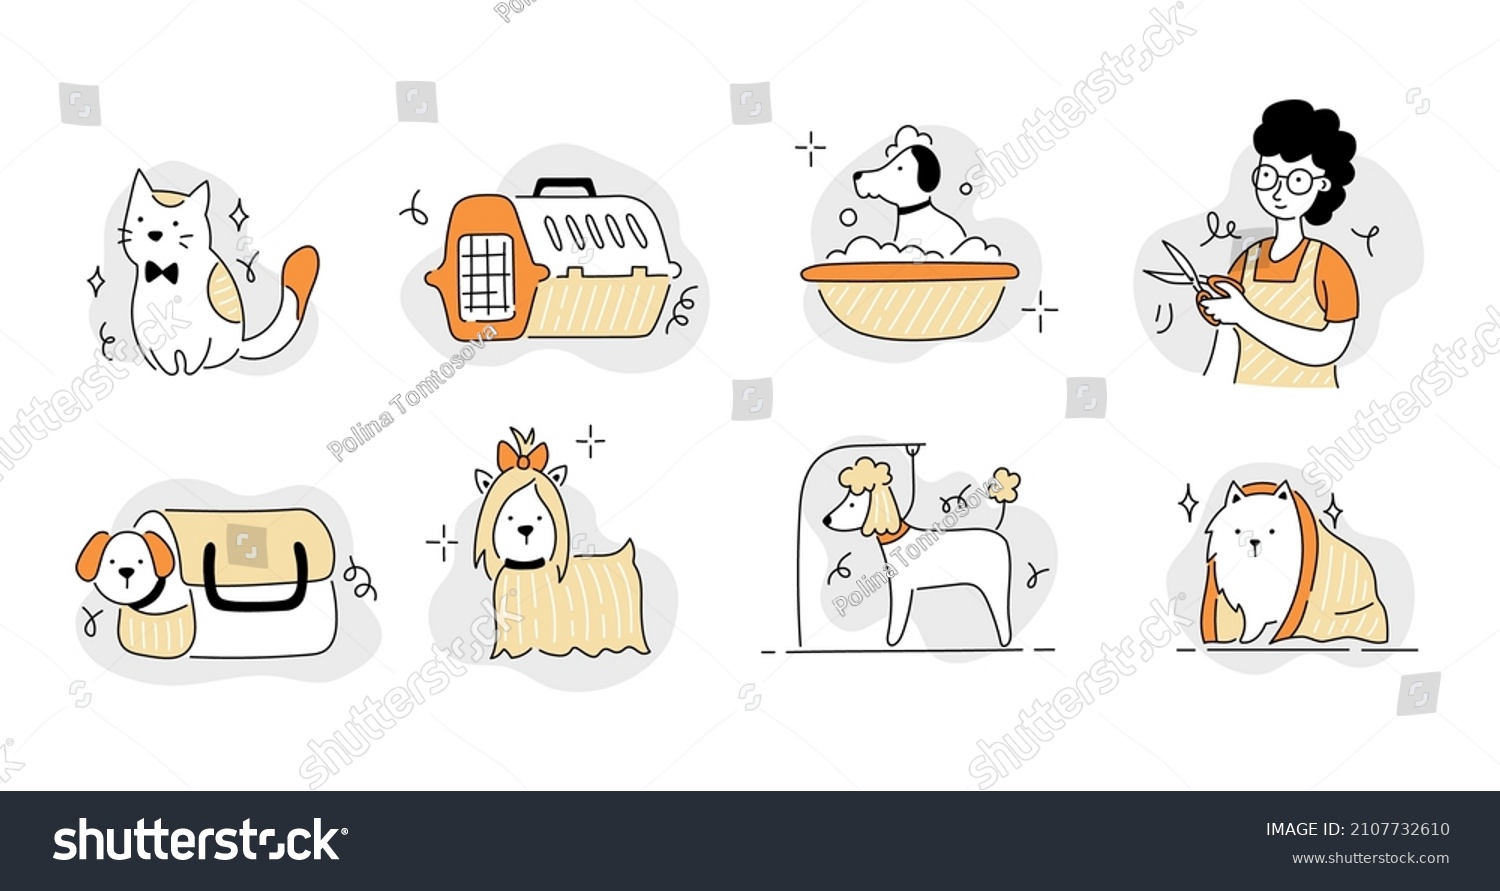 SVG of Pet grooming salon icon set. Cute dog beauty grooming salon, wash, care hair of pet. Doodle line style animal and character. Vector illustration.  svg